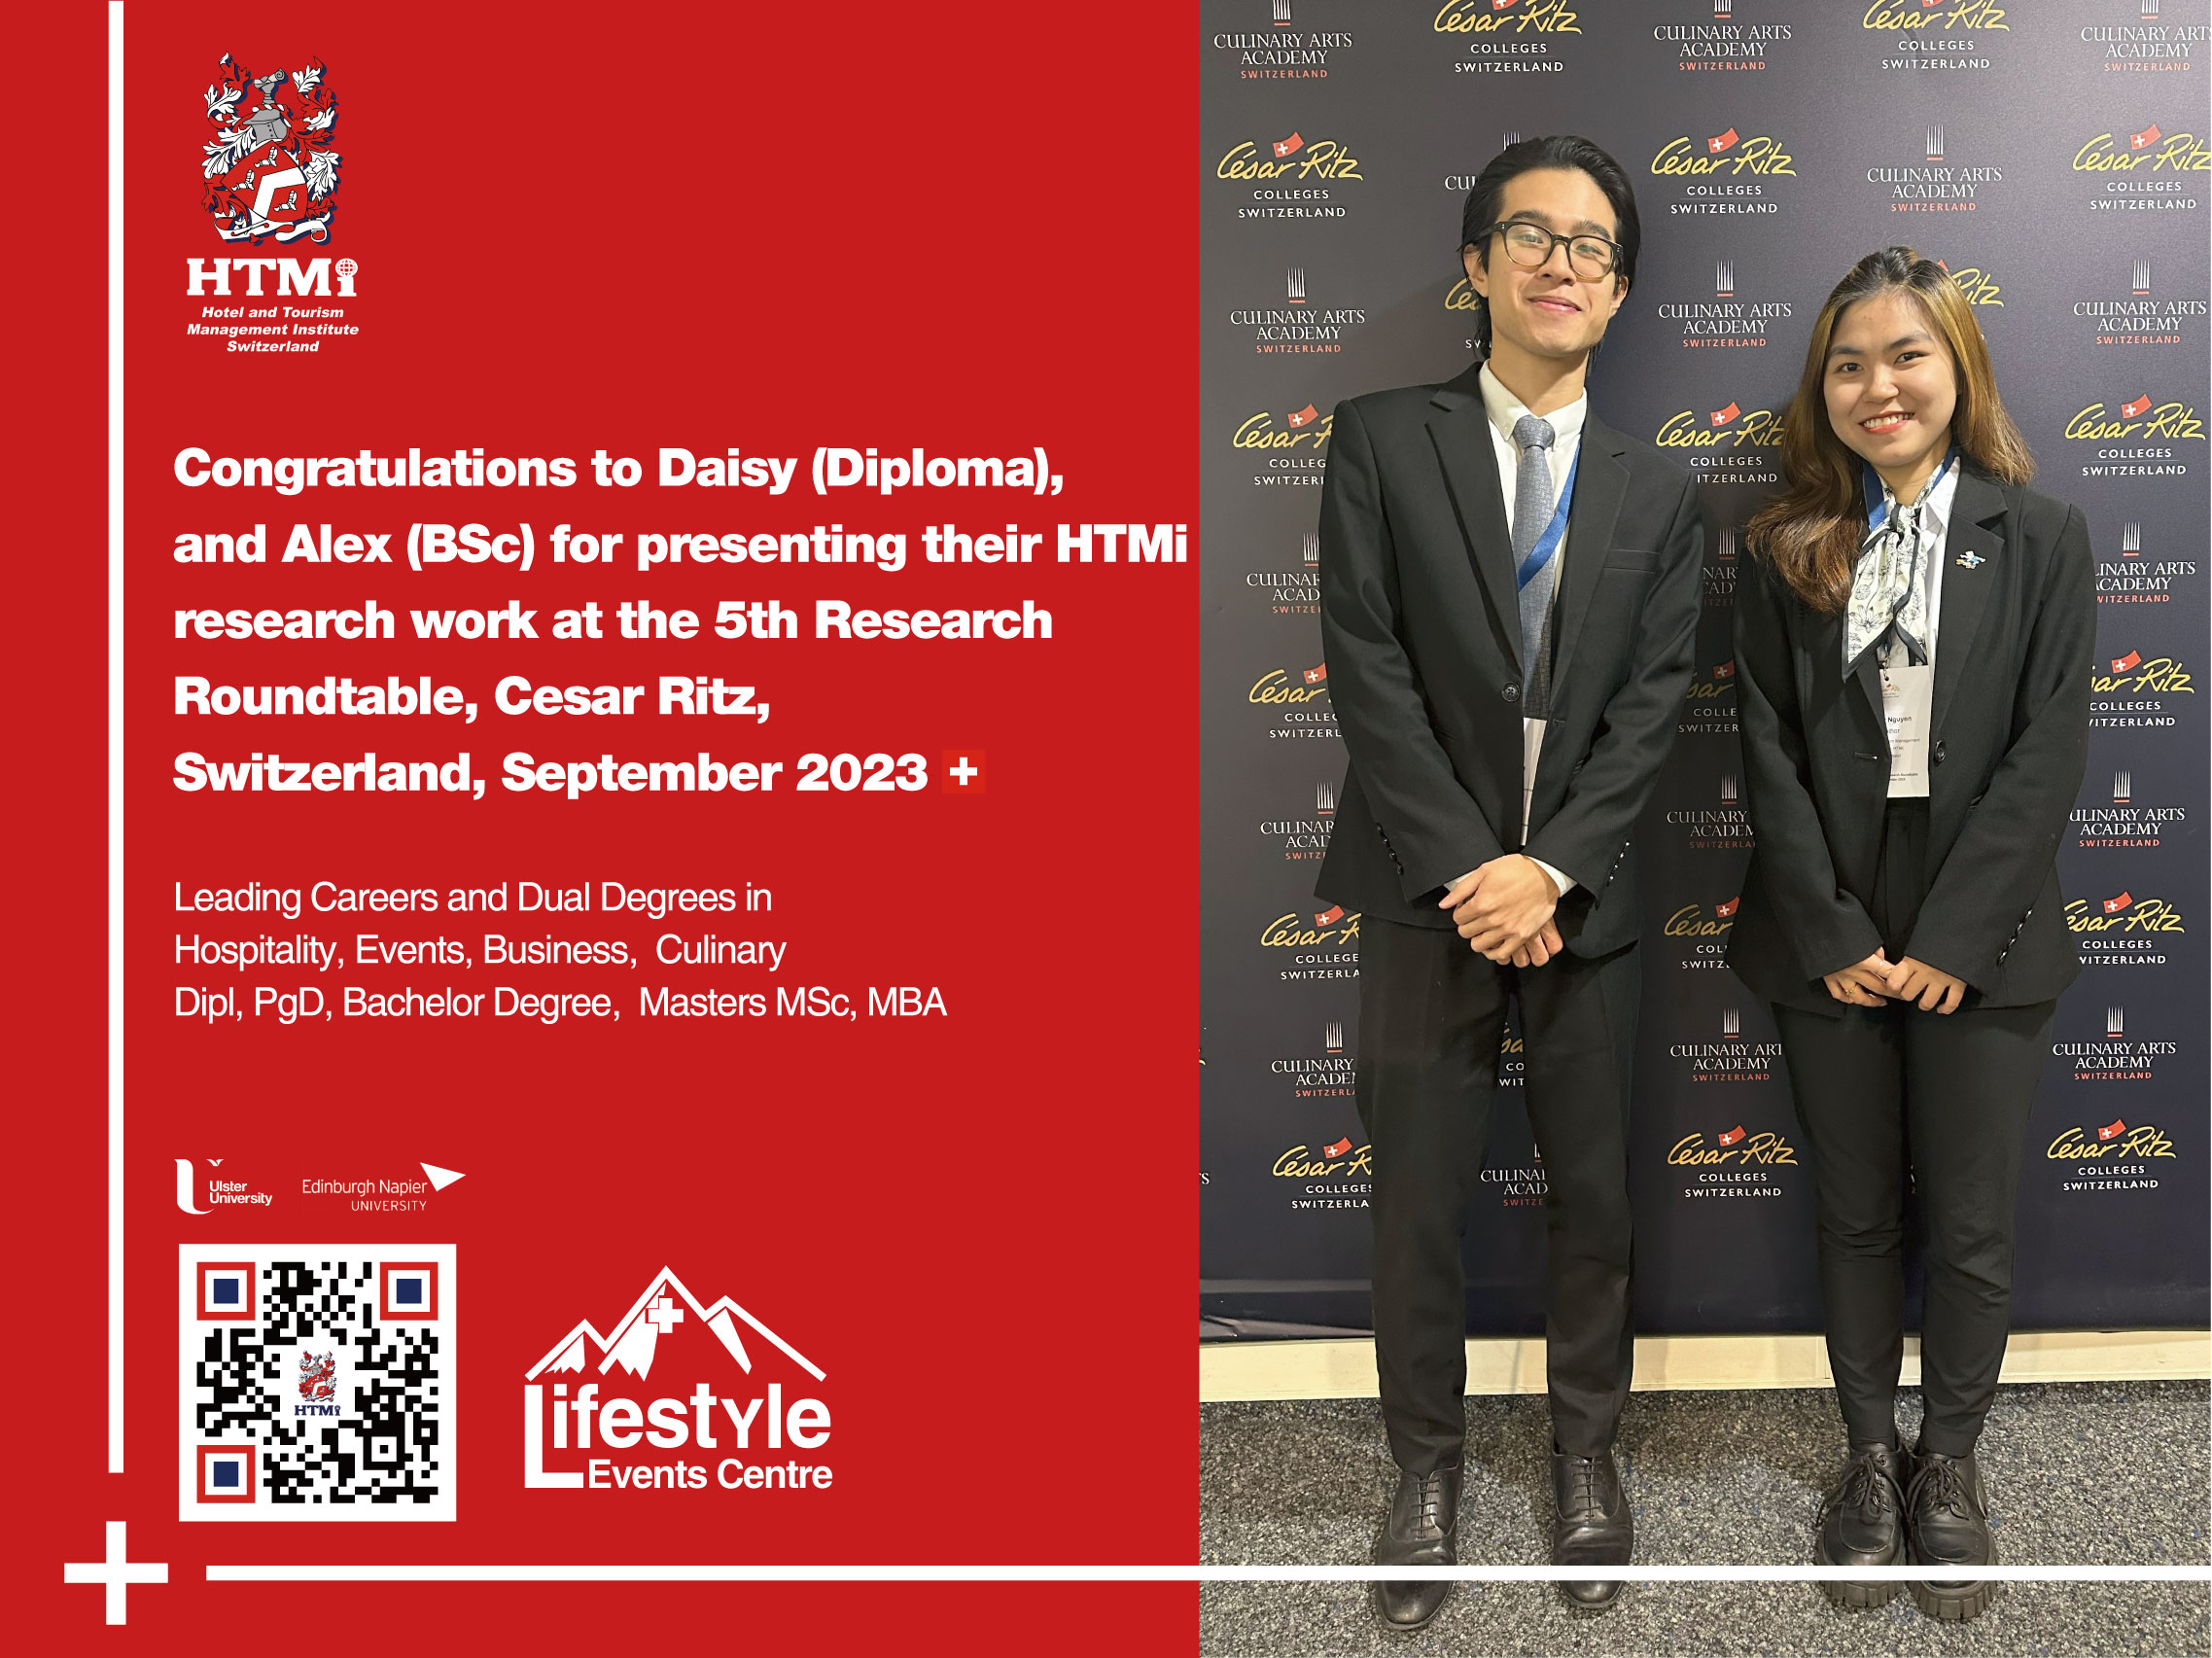 Congratulations to Daisy (Diploma), and Alex (BSc) for presenting their HTMi research work at the 5th Research Roundtable, Cesar Ritz, Switzerland, September 2023